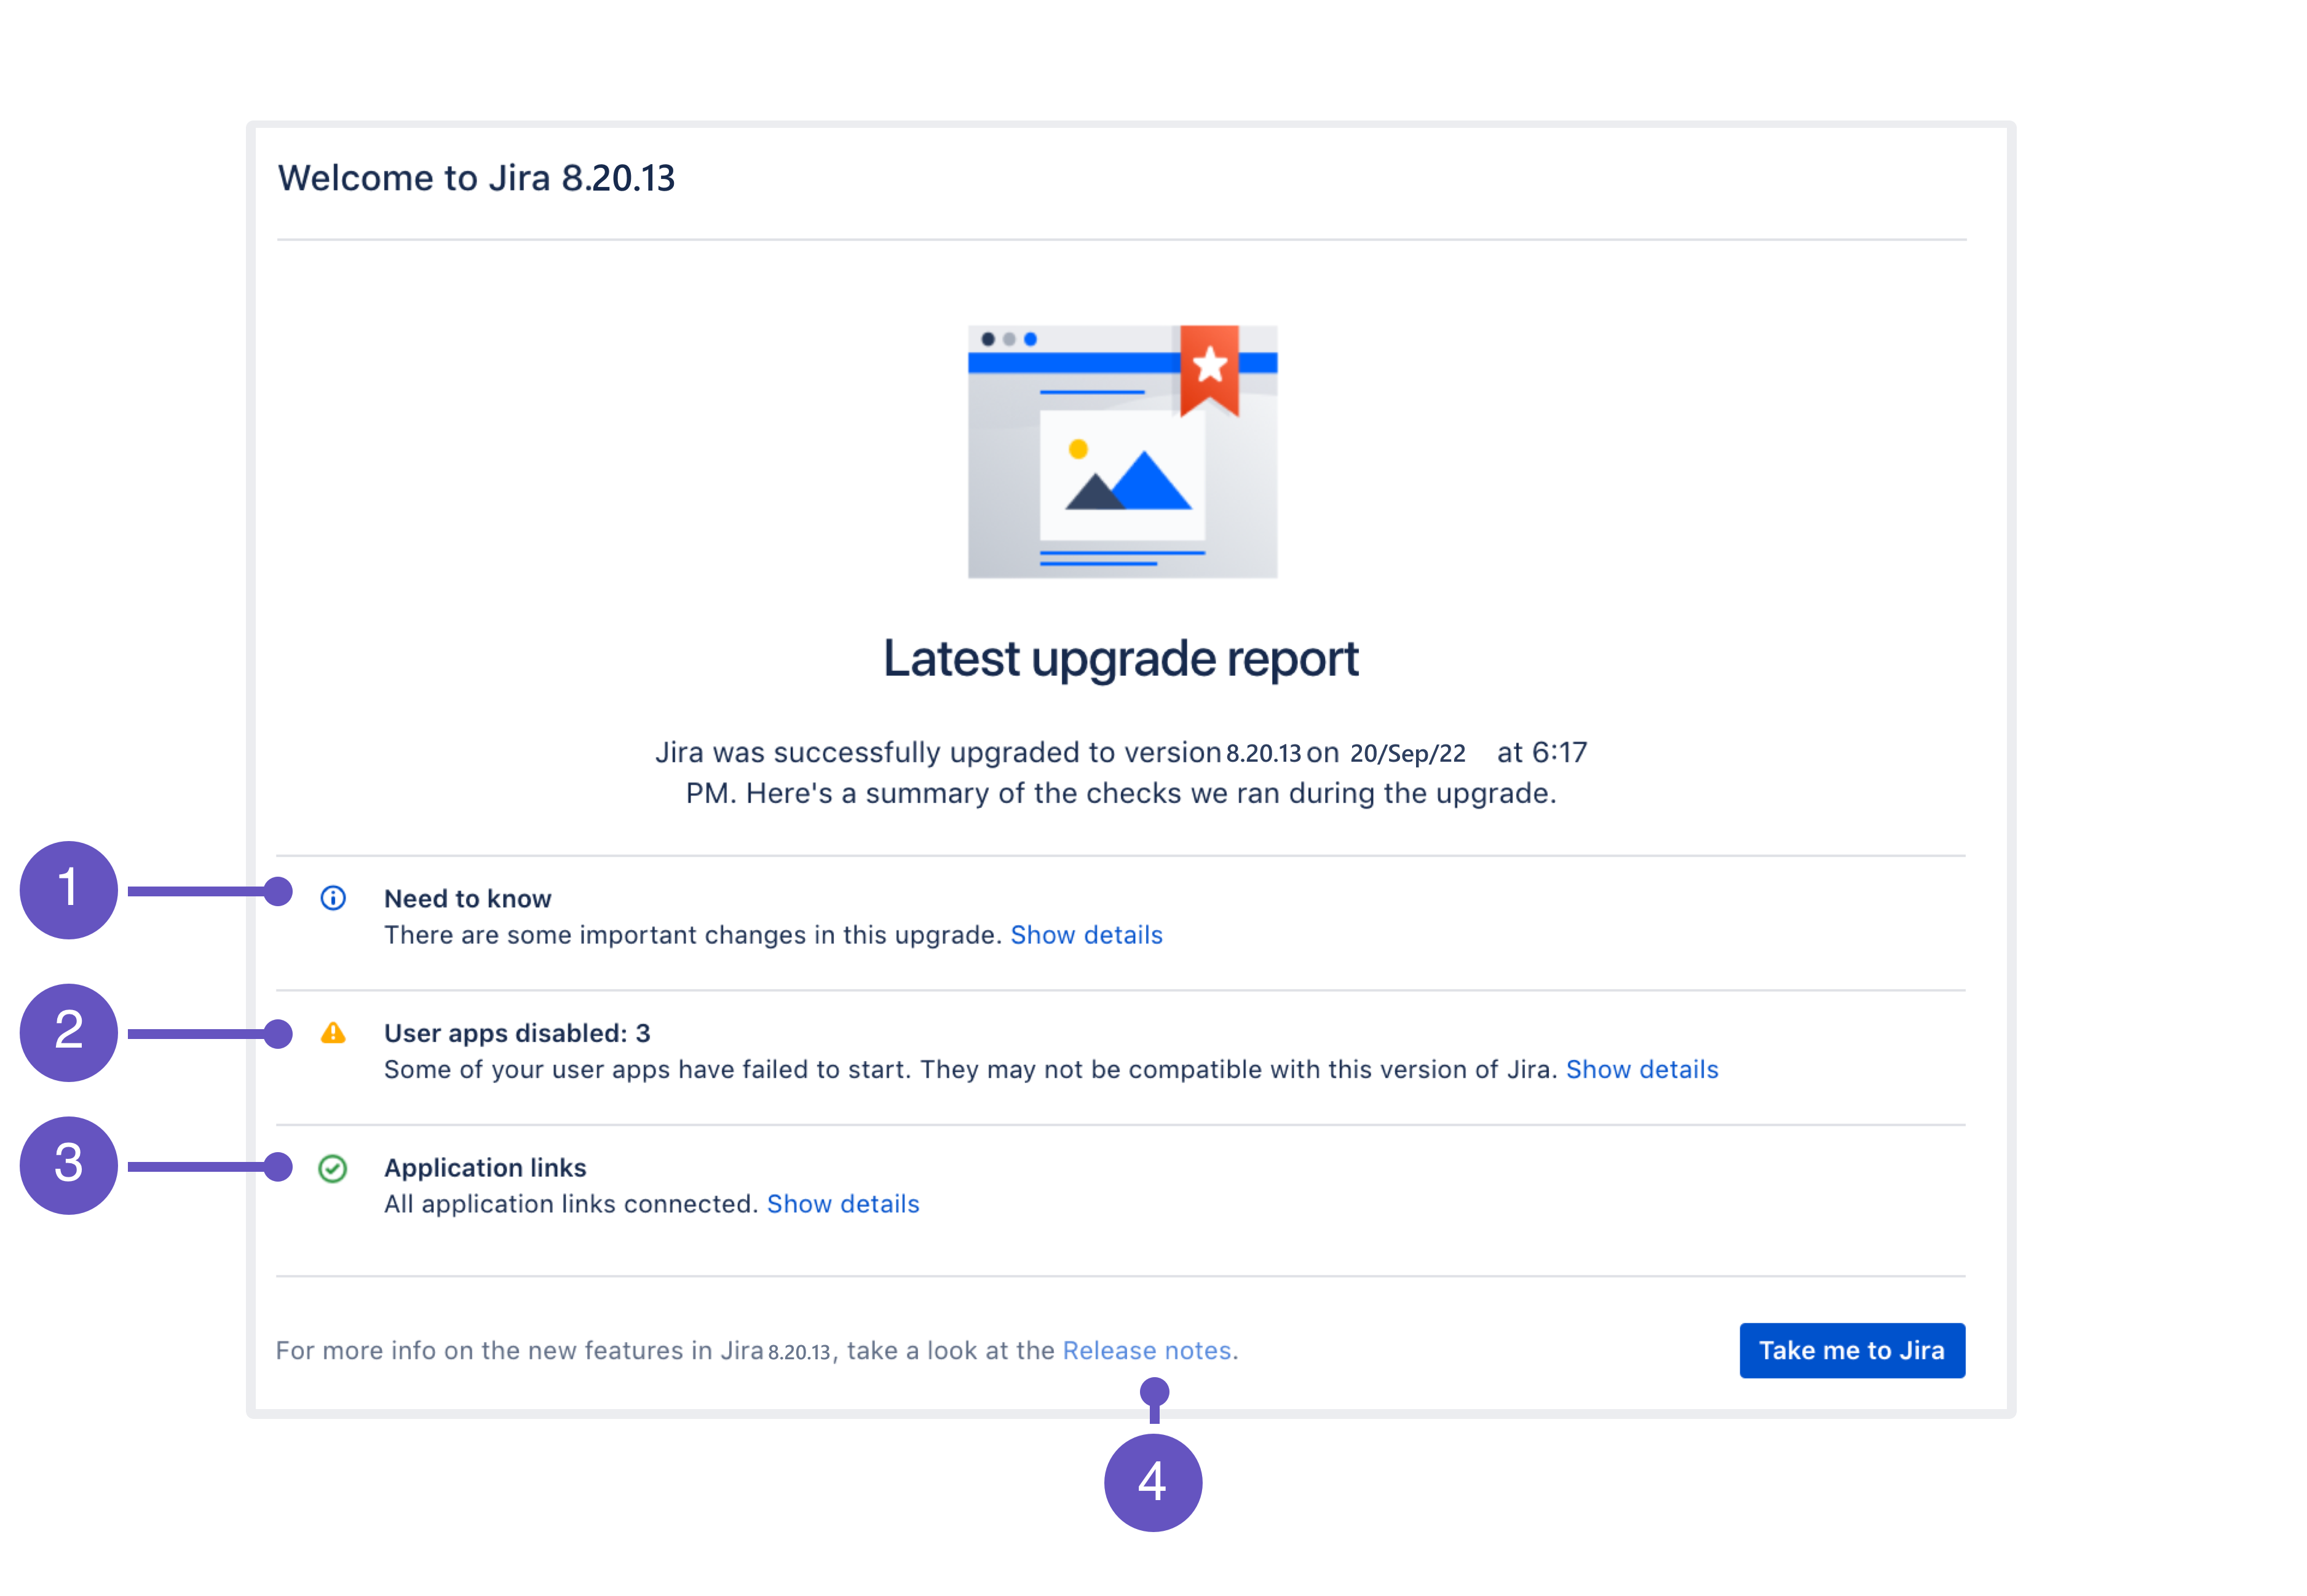 PUPL for Jira 8.20.13